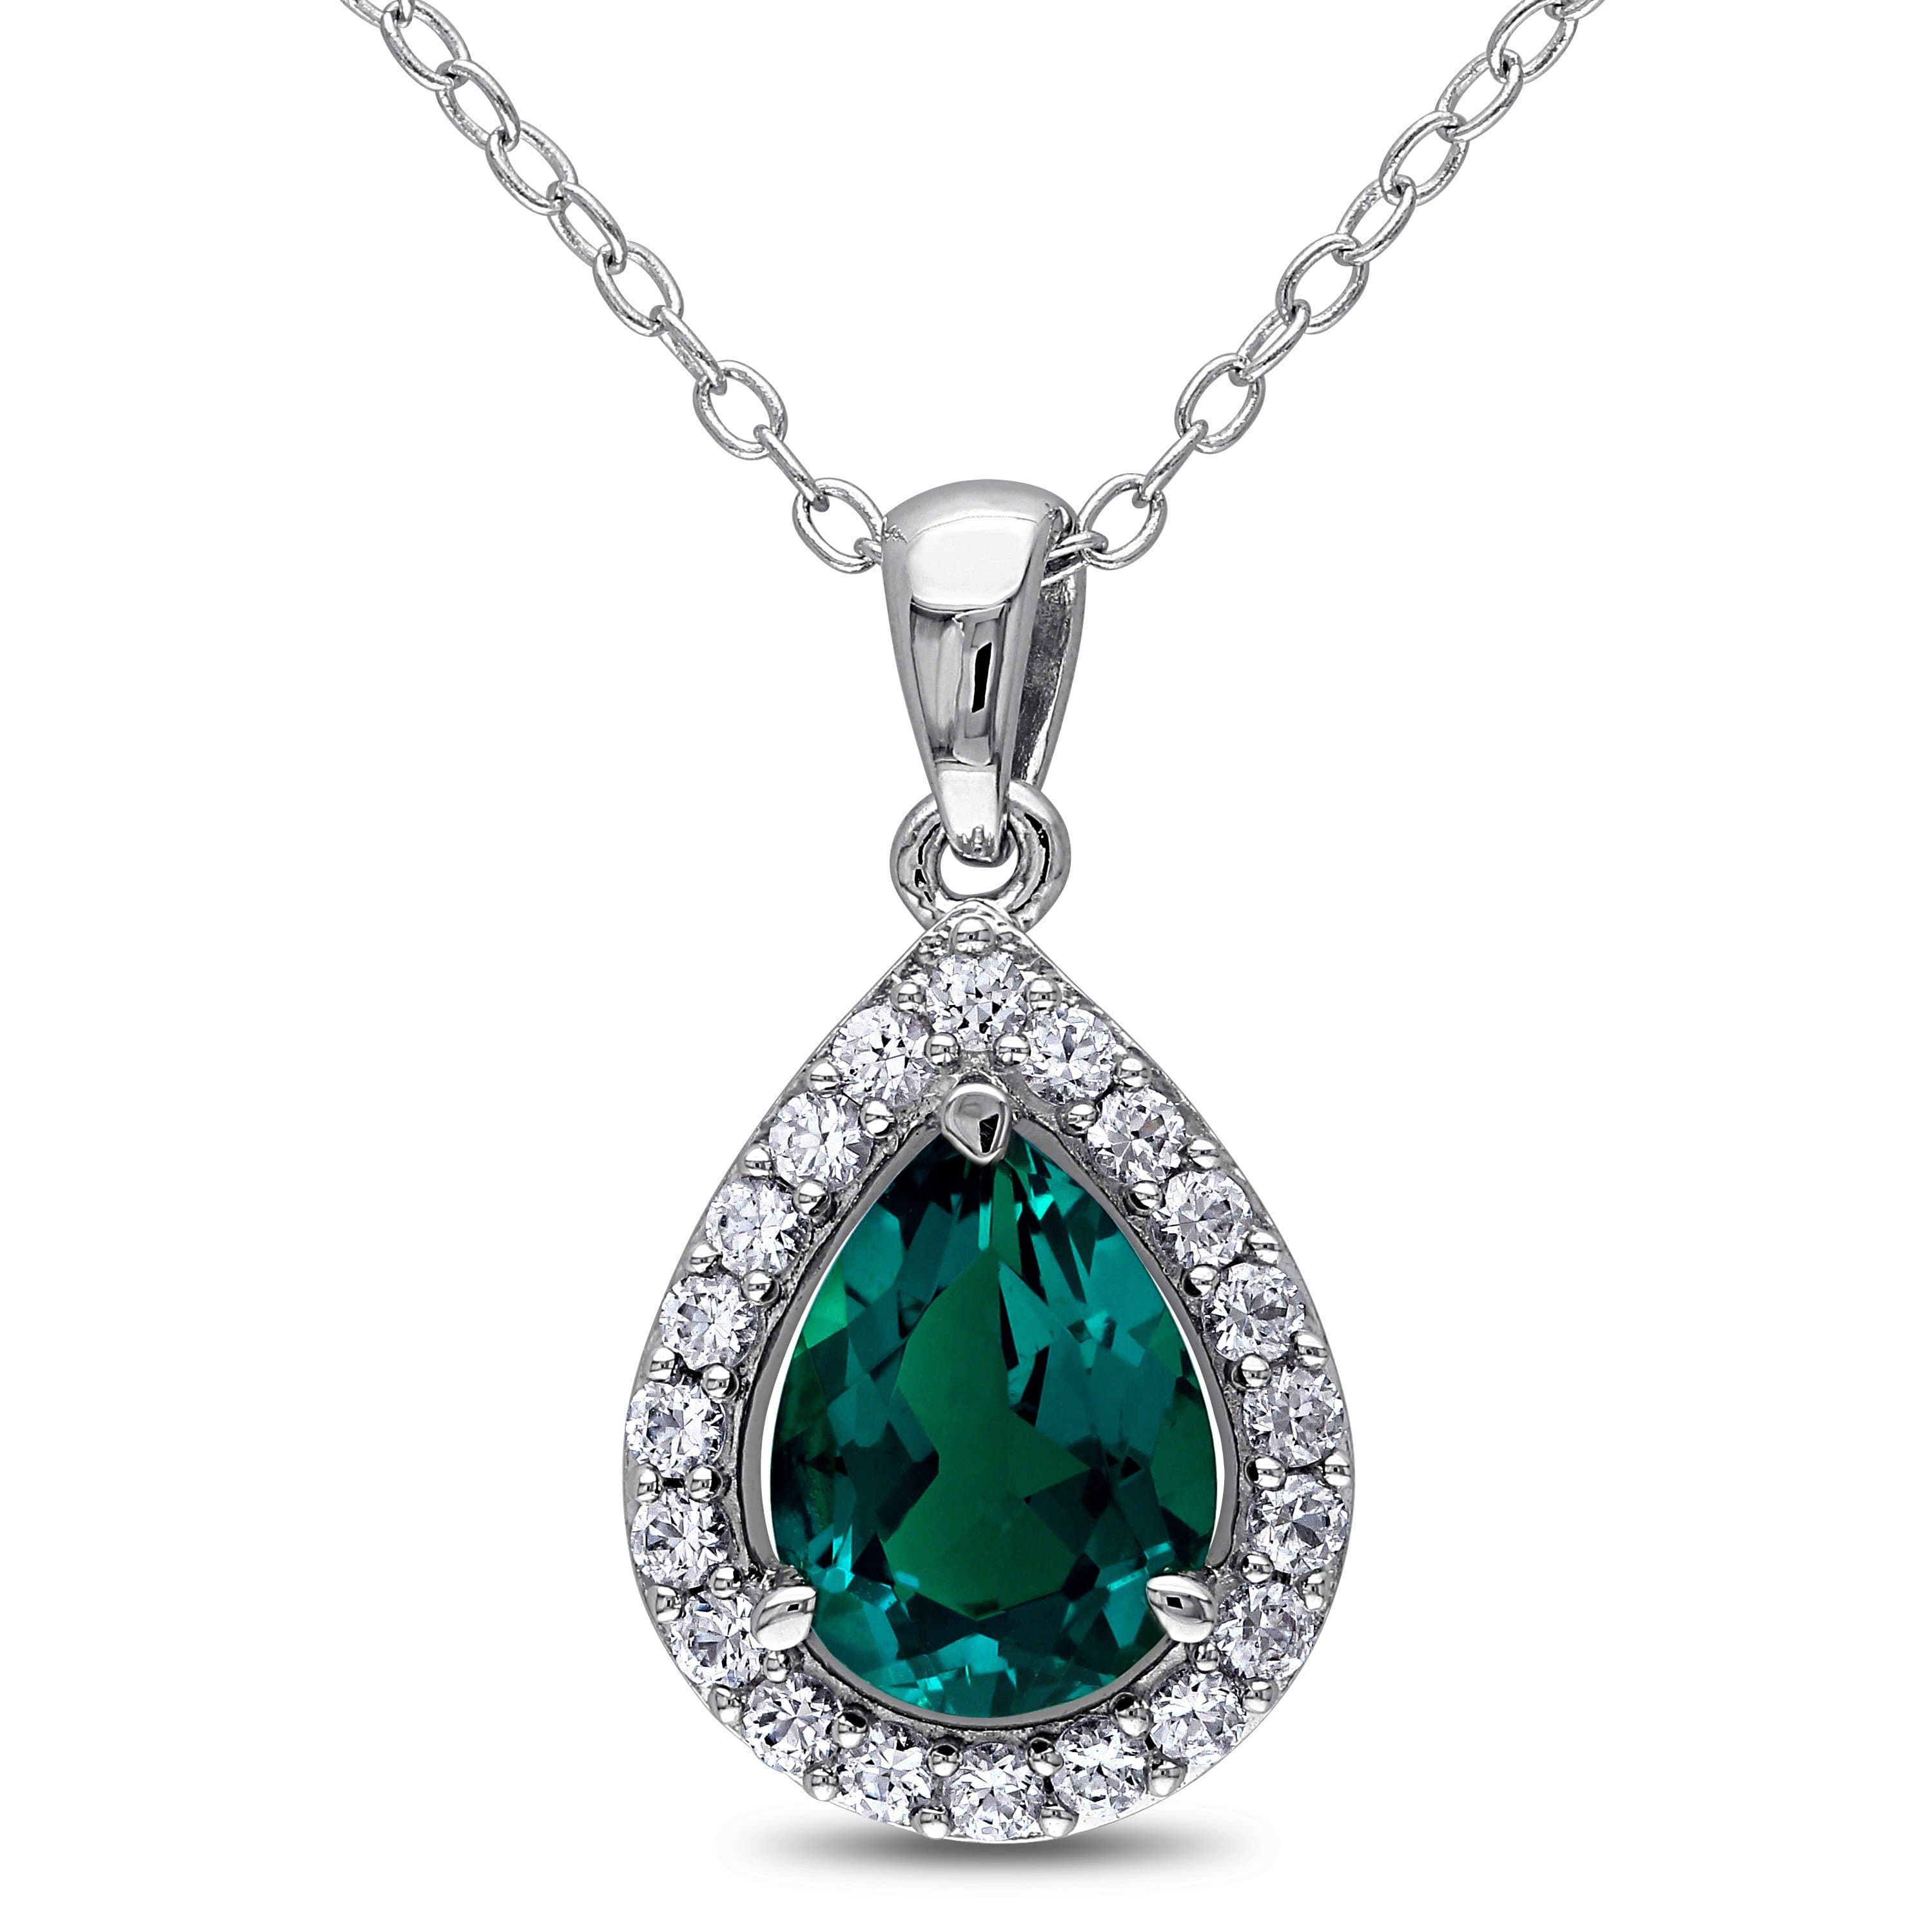 Emerald & White Sapphire Teardrop Necklace – IceTrends